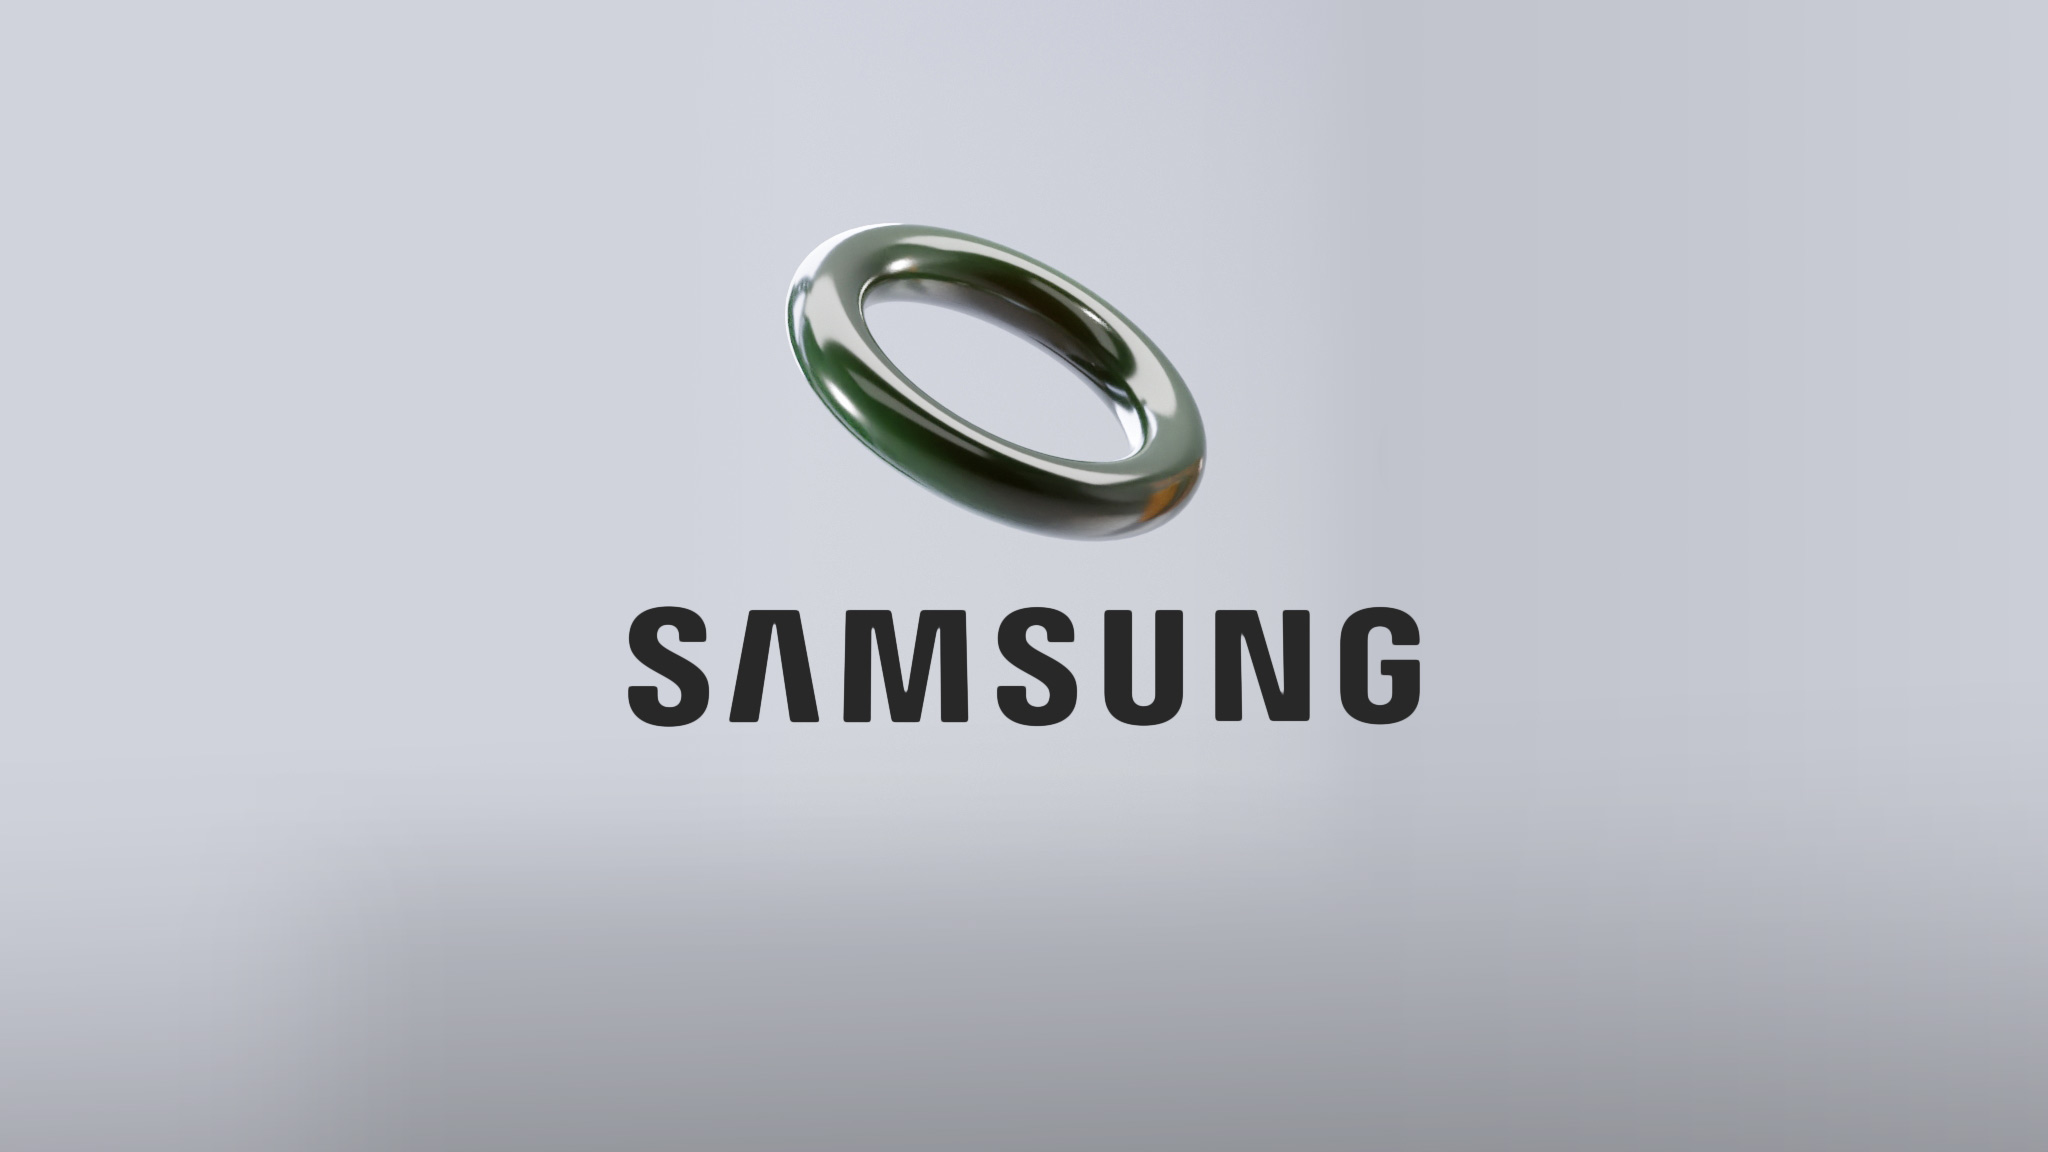 Samsung Galaxy Ring could accurately track your health metrics